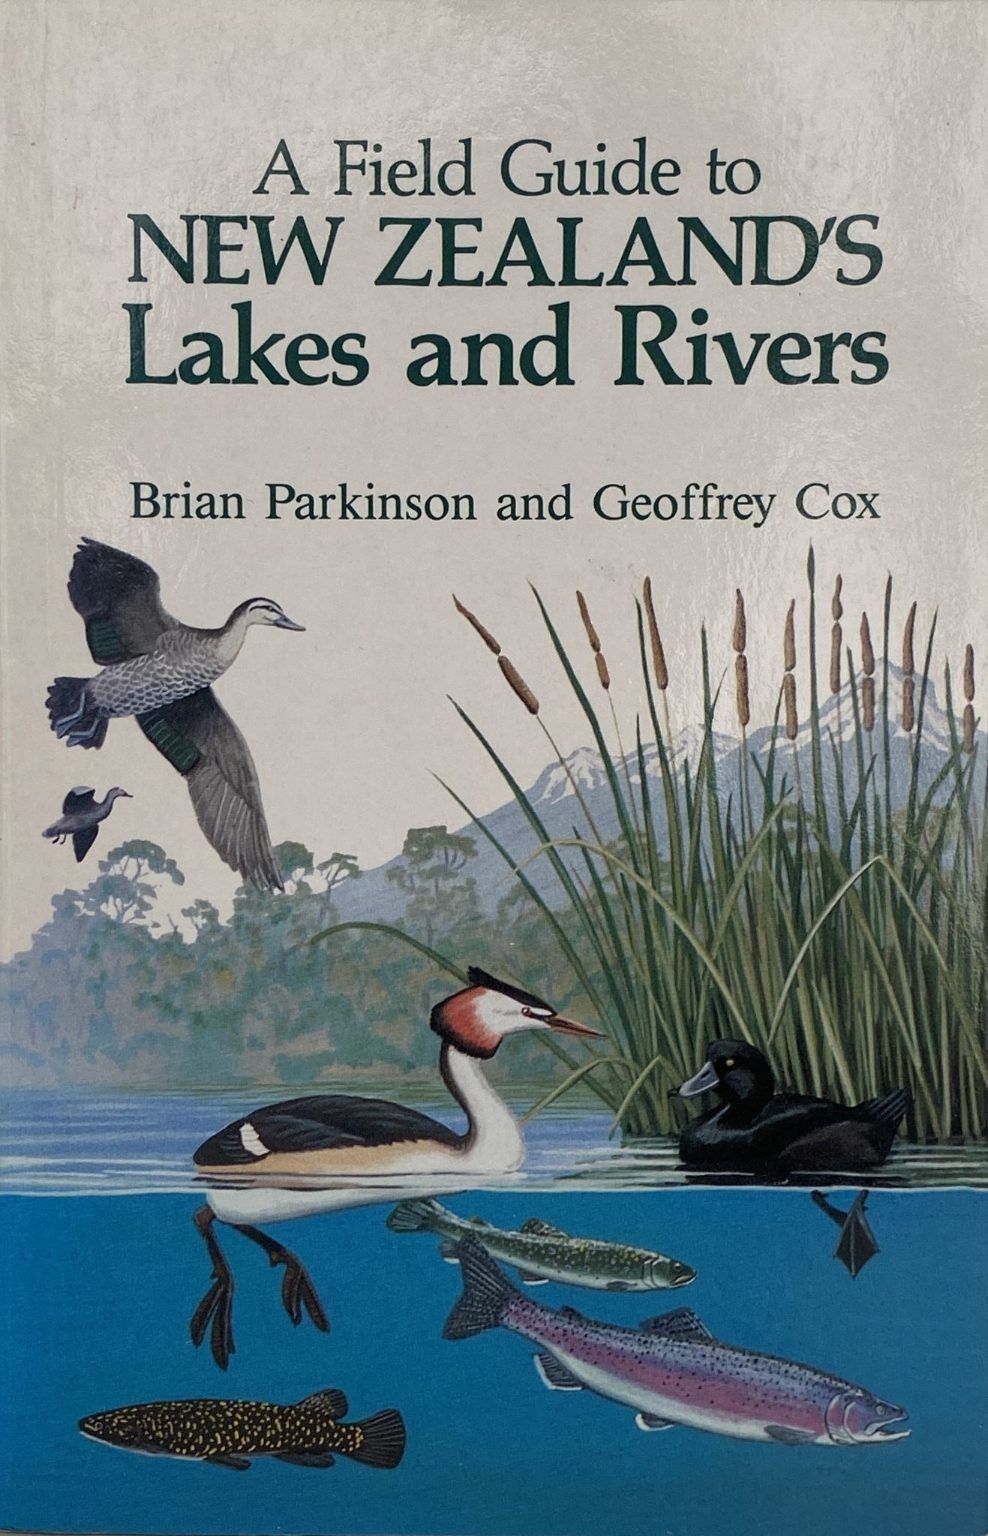 NEW ZEALAND LAKES AND RIVERS: A Field Guide